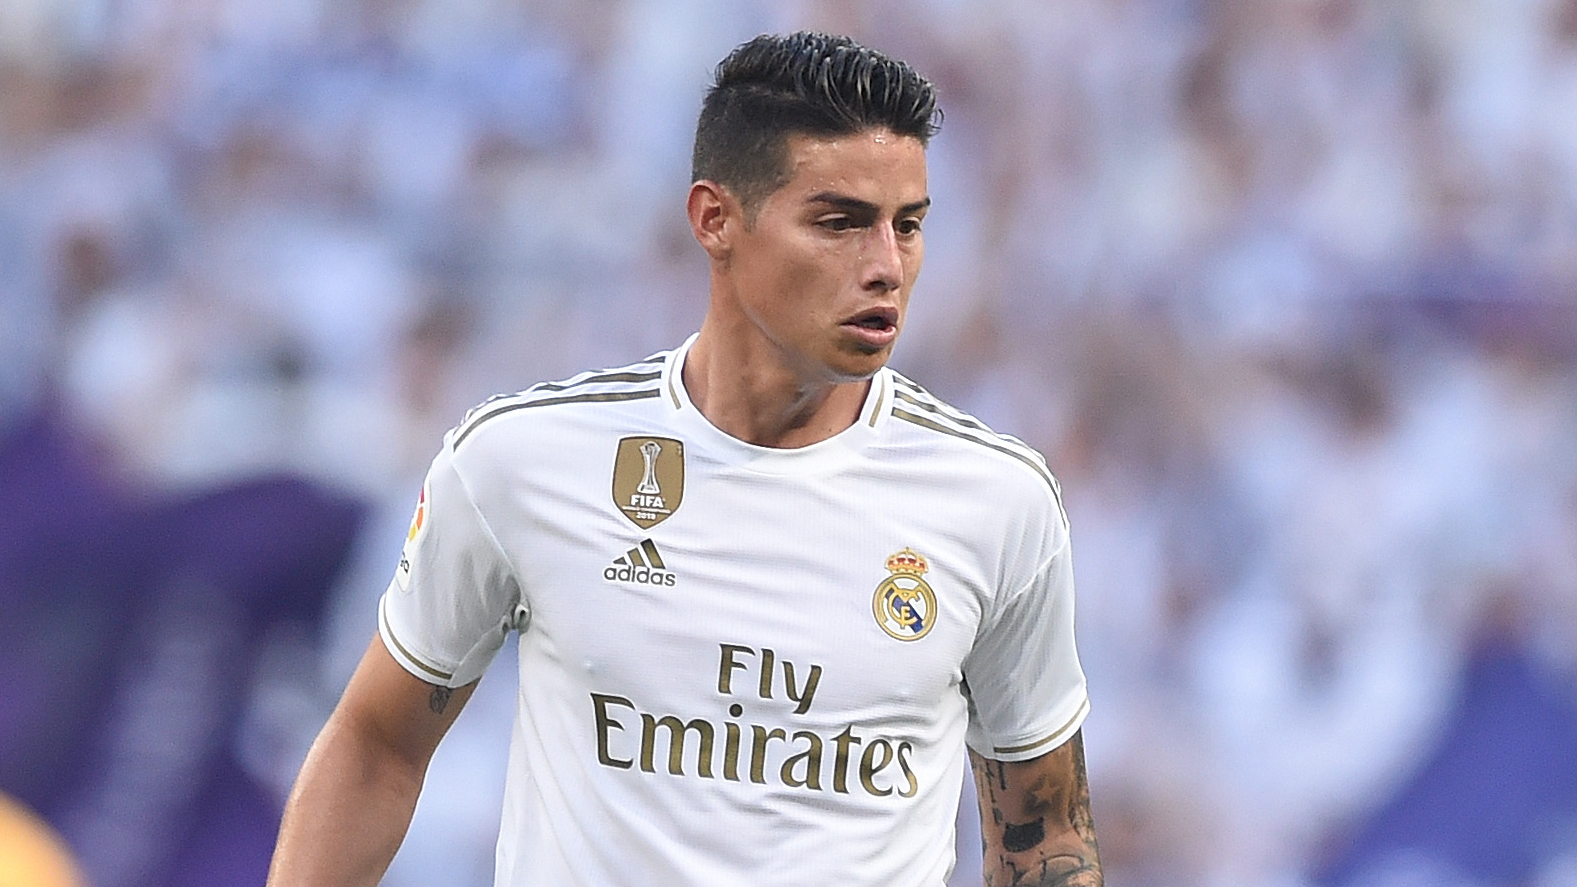 ‘James can play anywhere in the world’ – Zamorano backing Real Madrid outcast to bounce back